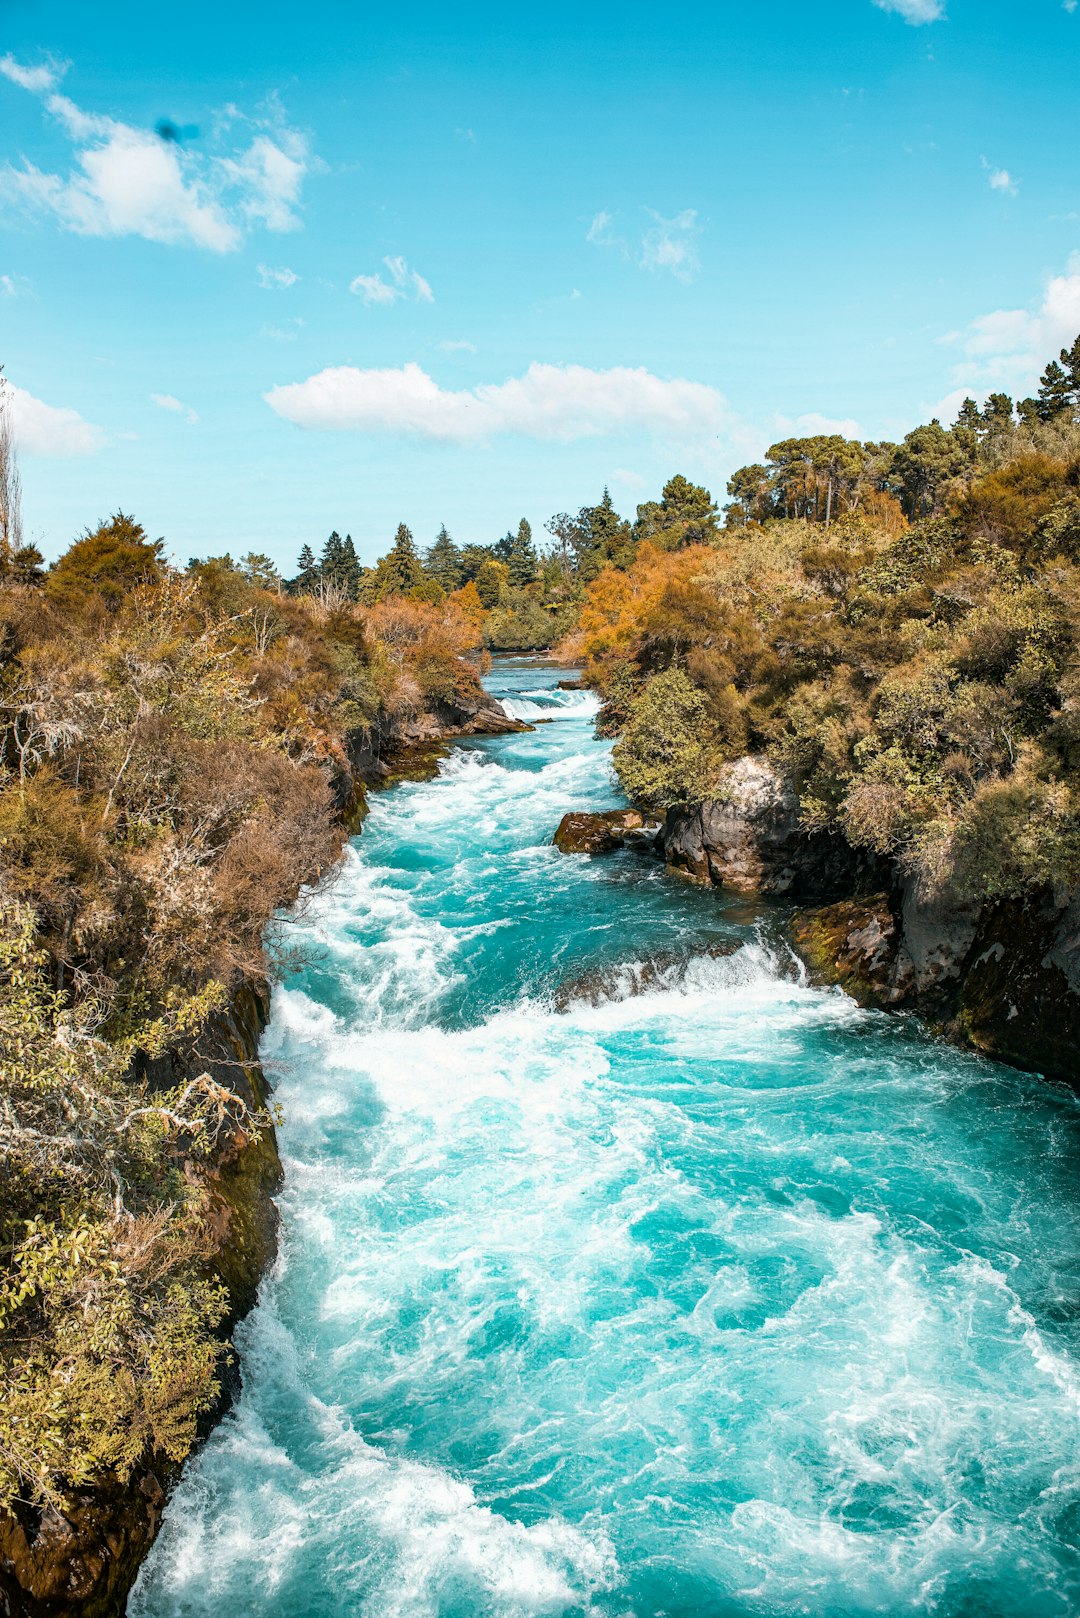 Travel Tips and Stories of Taupo in New Zealand